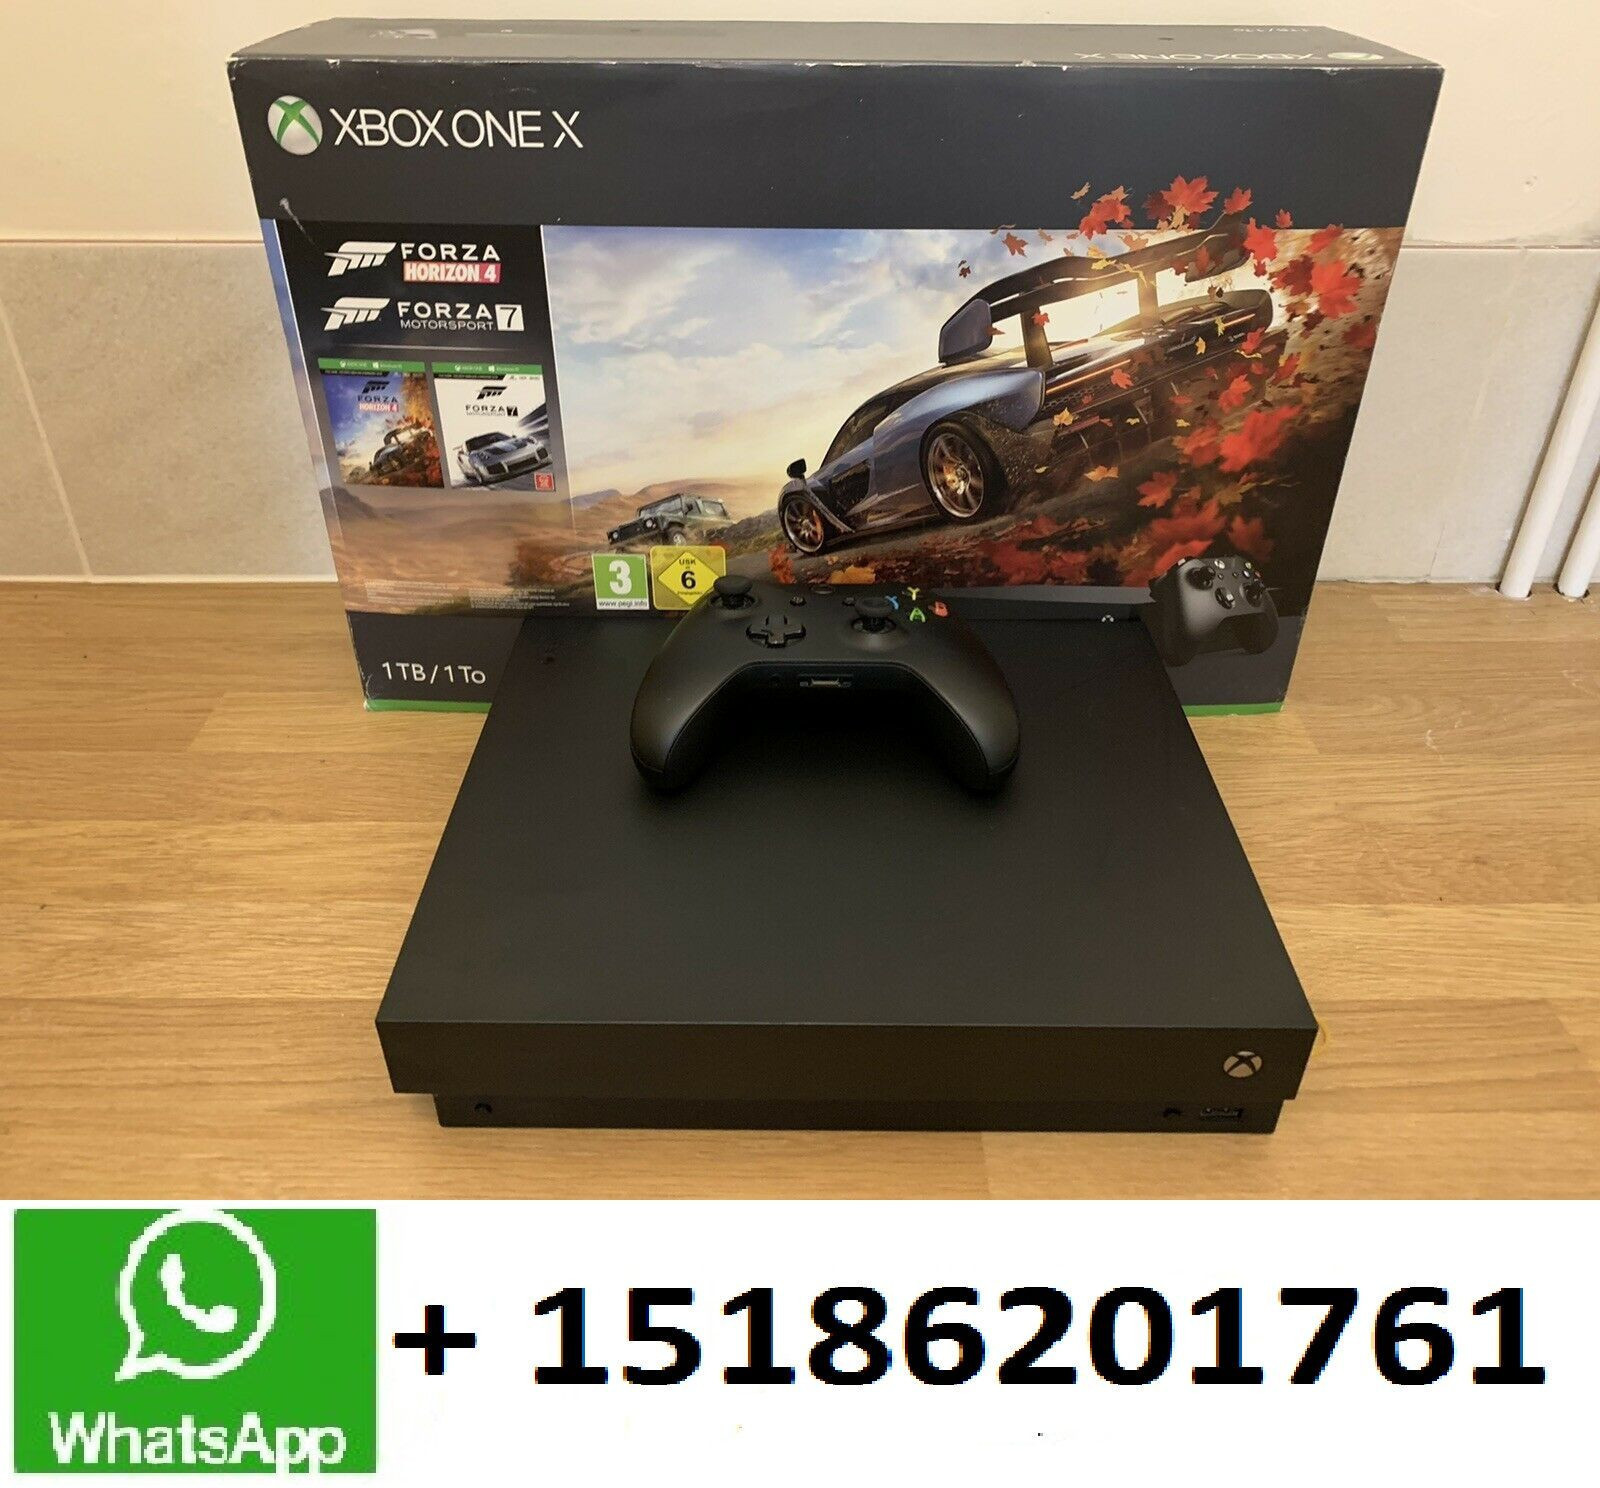 New XboXS One X 1TB / 2TB Console with Wireless Controller With 10 free games